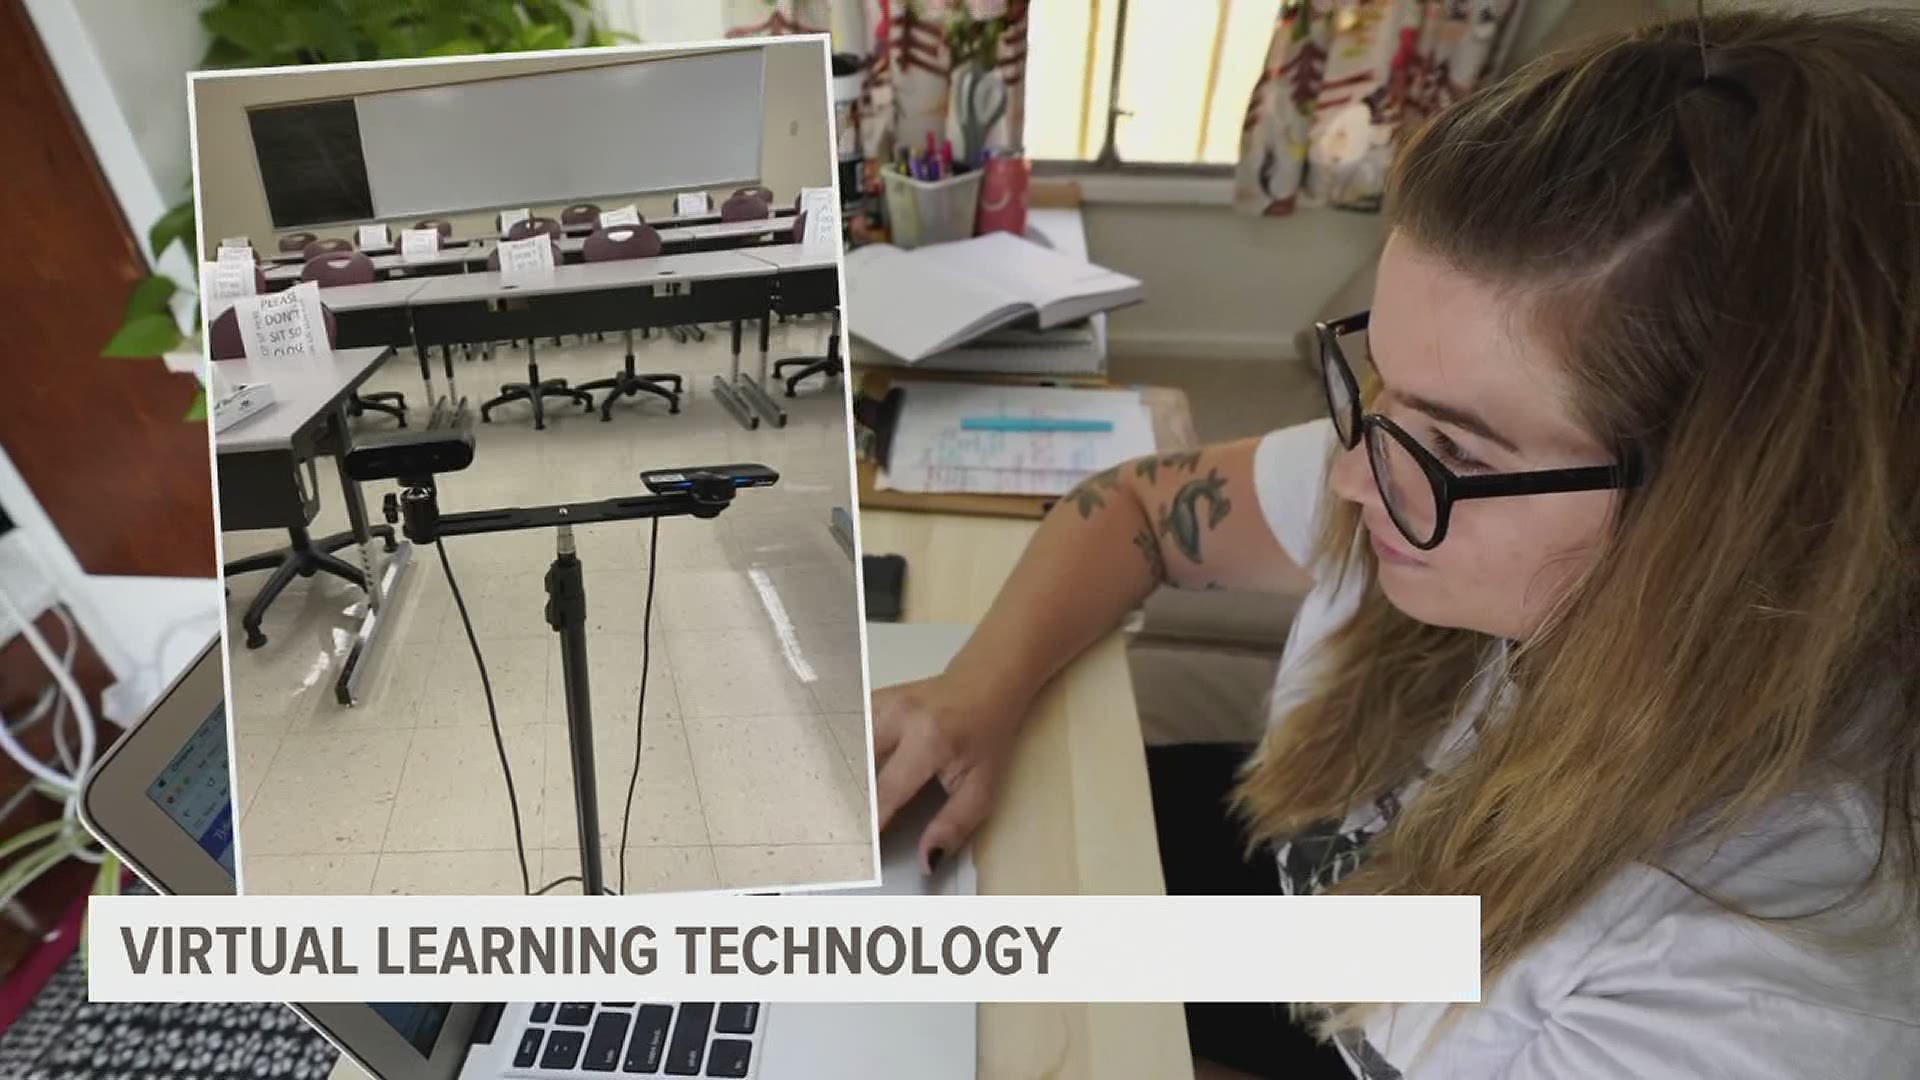 Panoramic camera set-ups through Microsoft Teams will allow educators in class to communicate with students virtually from home.